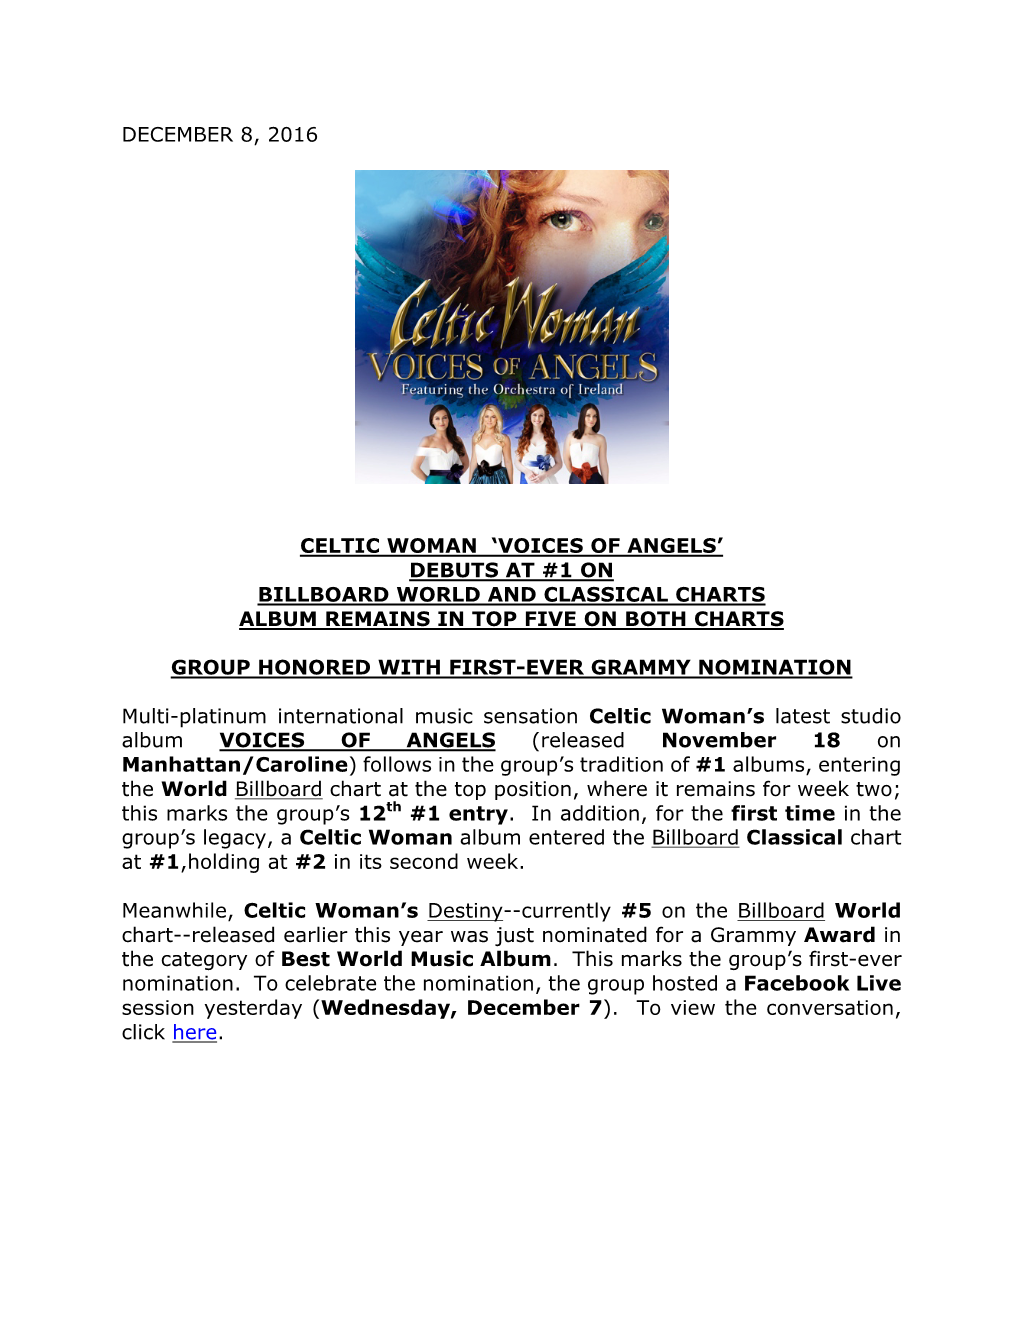 December 8, 2016 Celtic Woman 'Voices of Angels' Debuts at #1 on Billboard World and Classical Charts Album Remains In